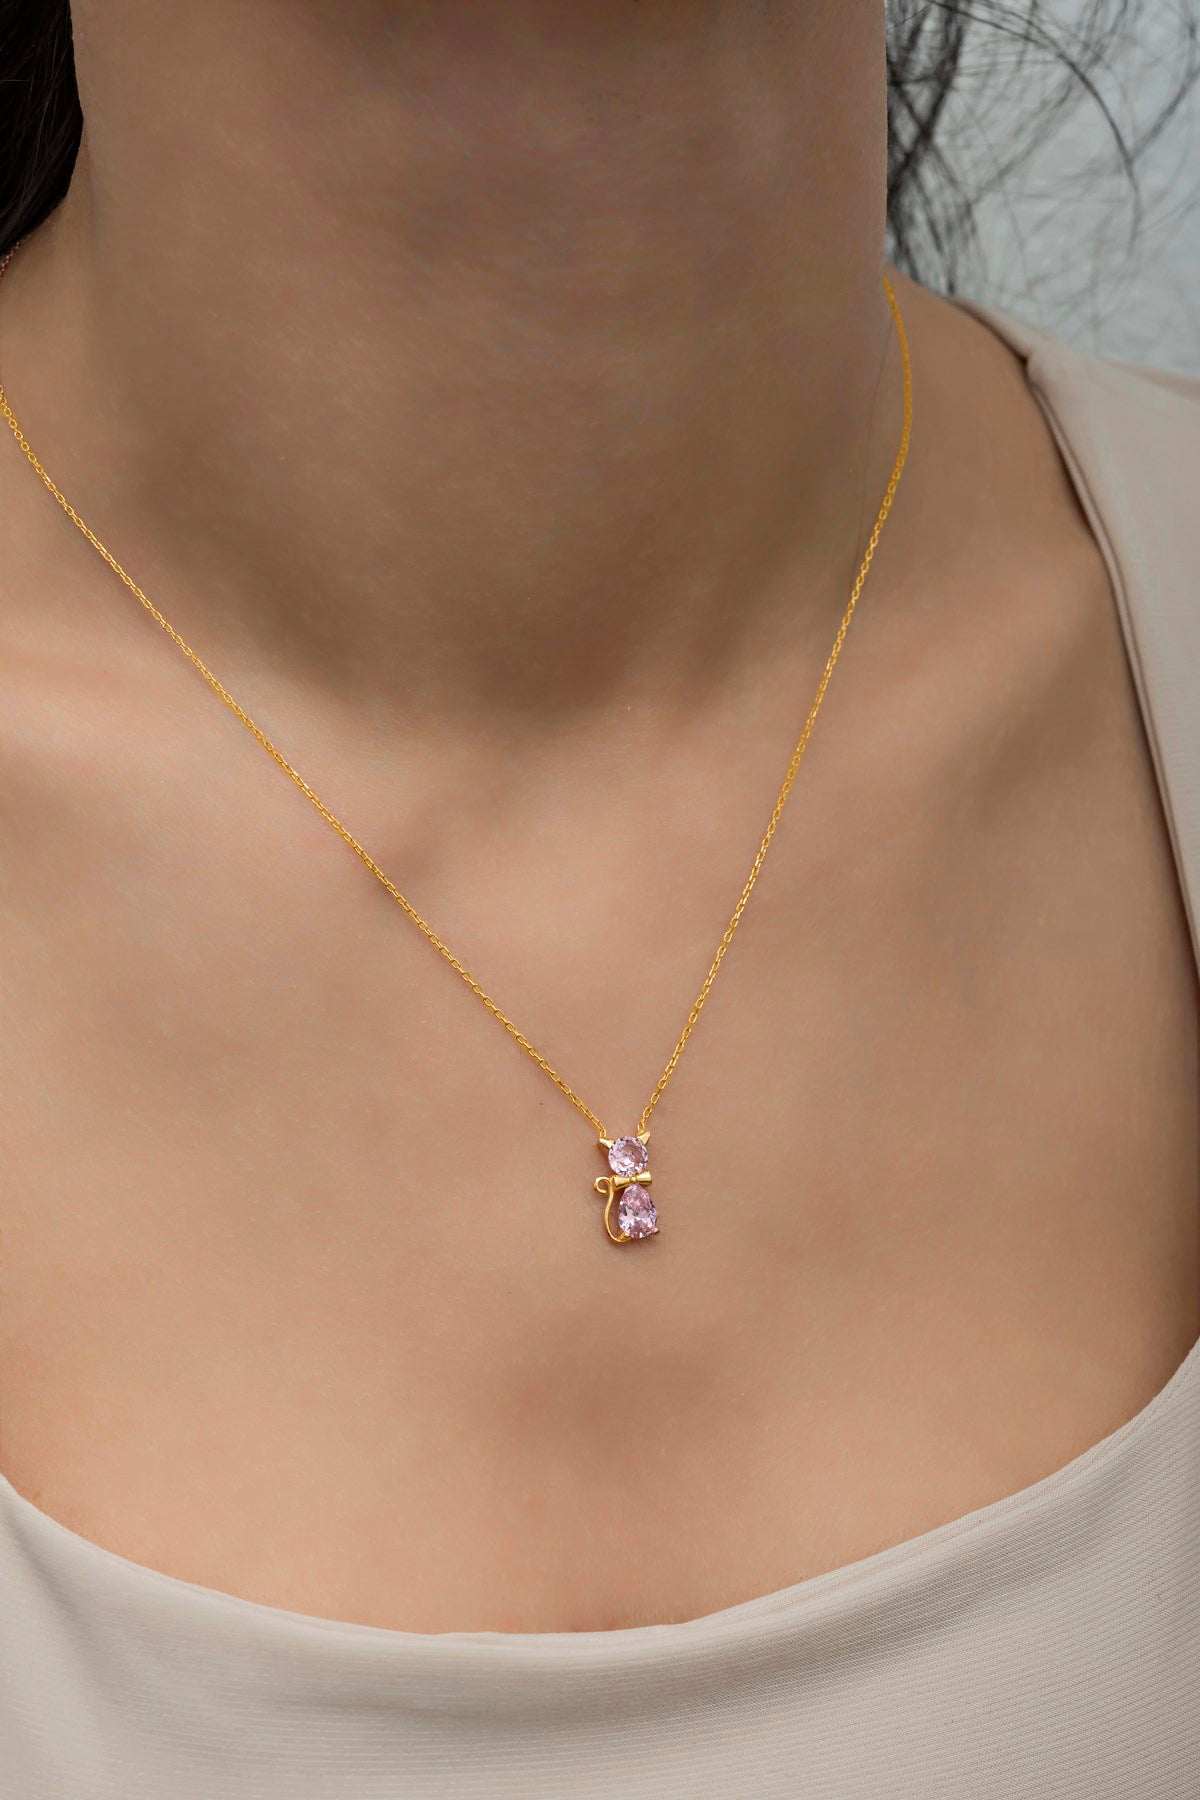 Pink Stone Cat Necklace Gold Plated